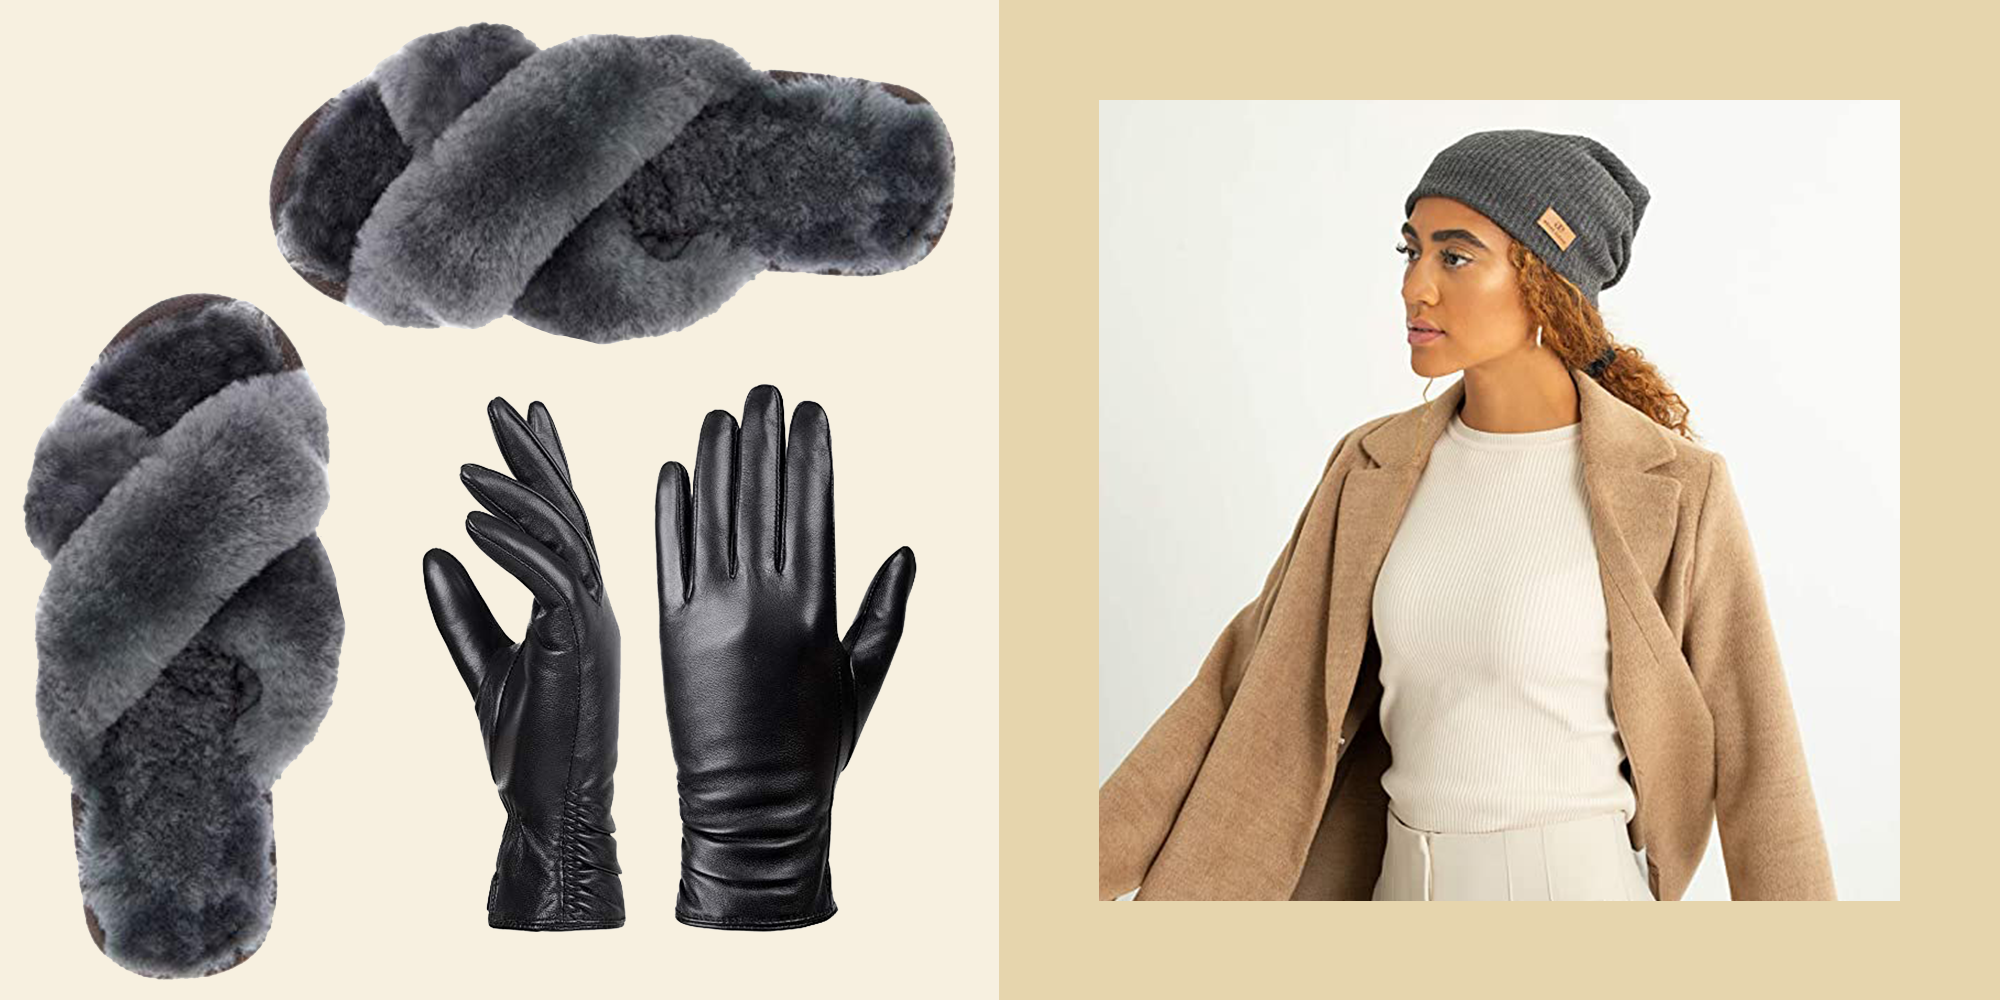 Best winter accessories: 12 of the best winter hats and gloves